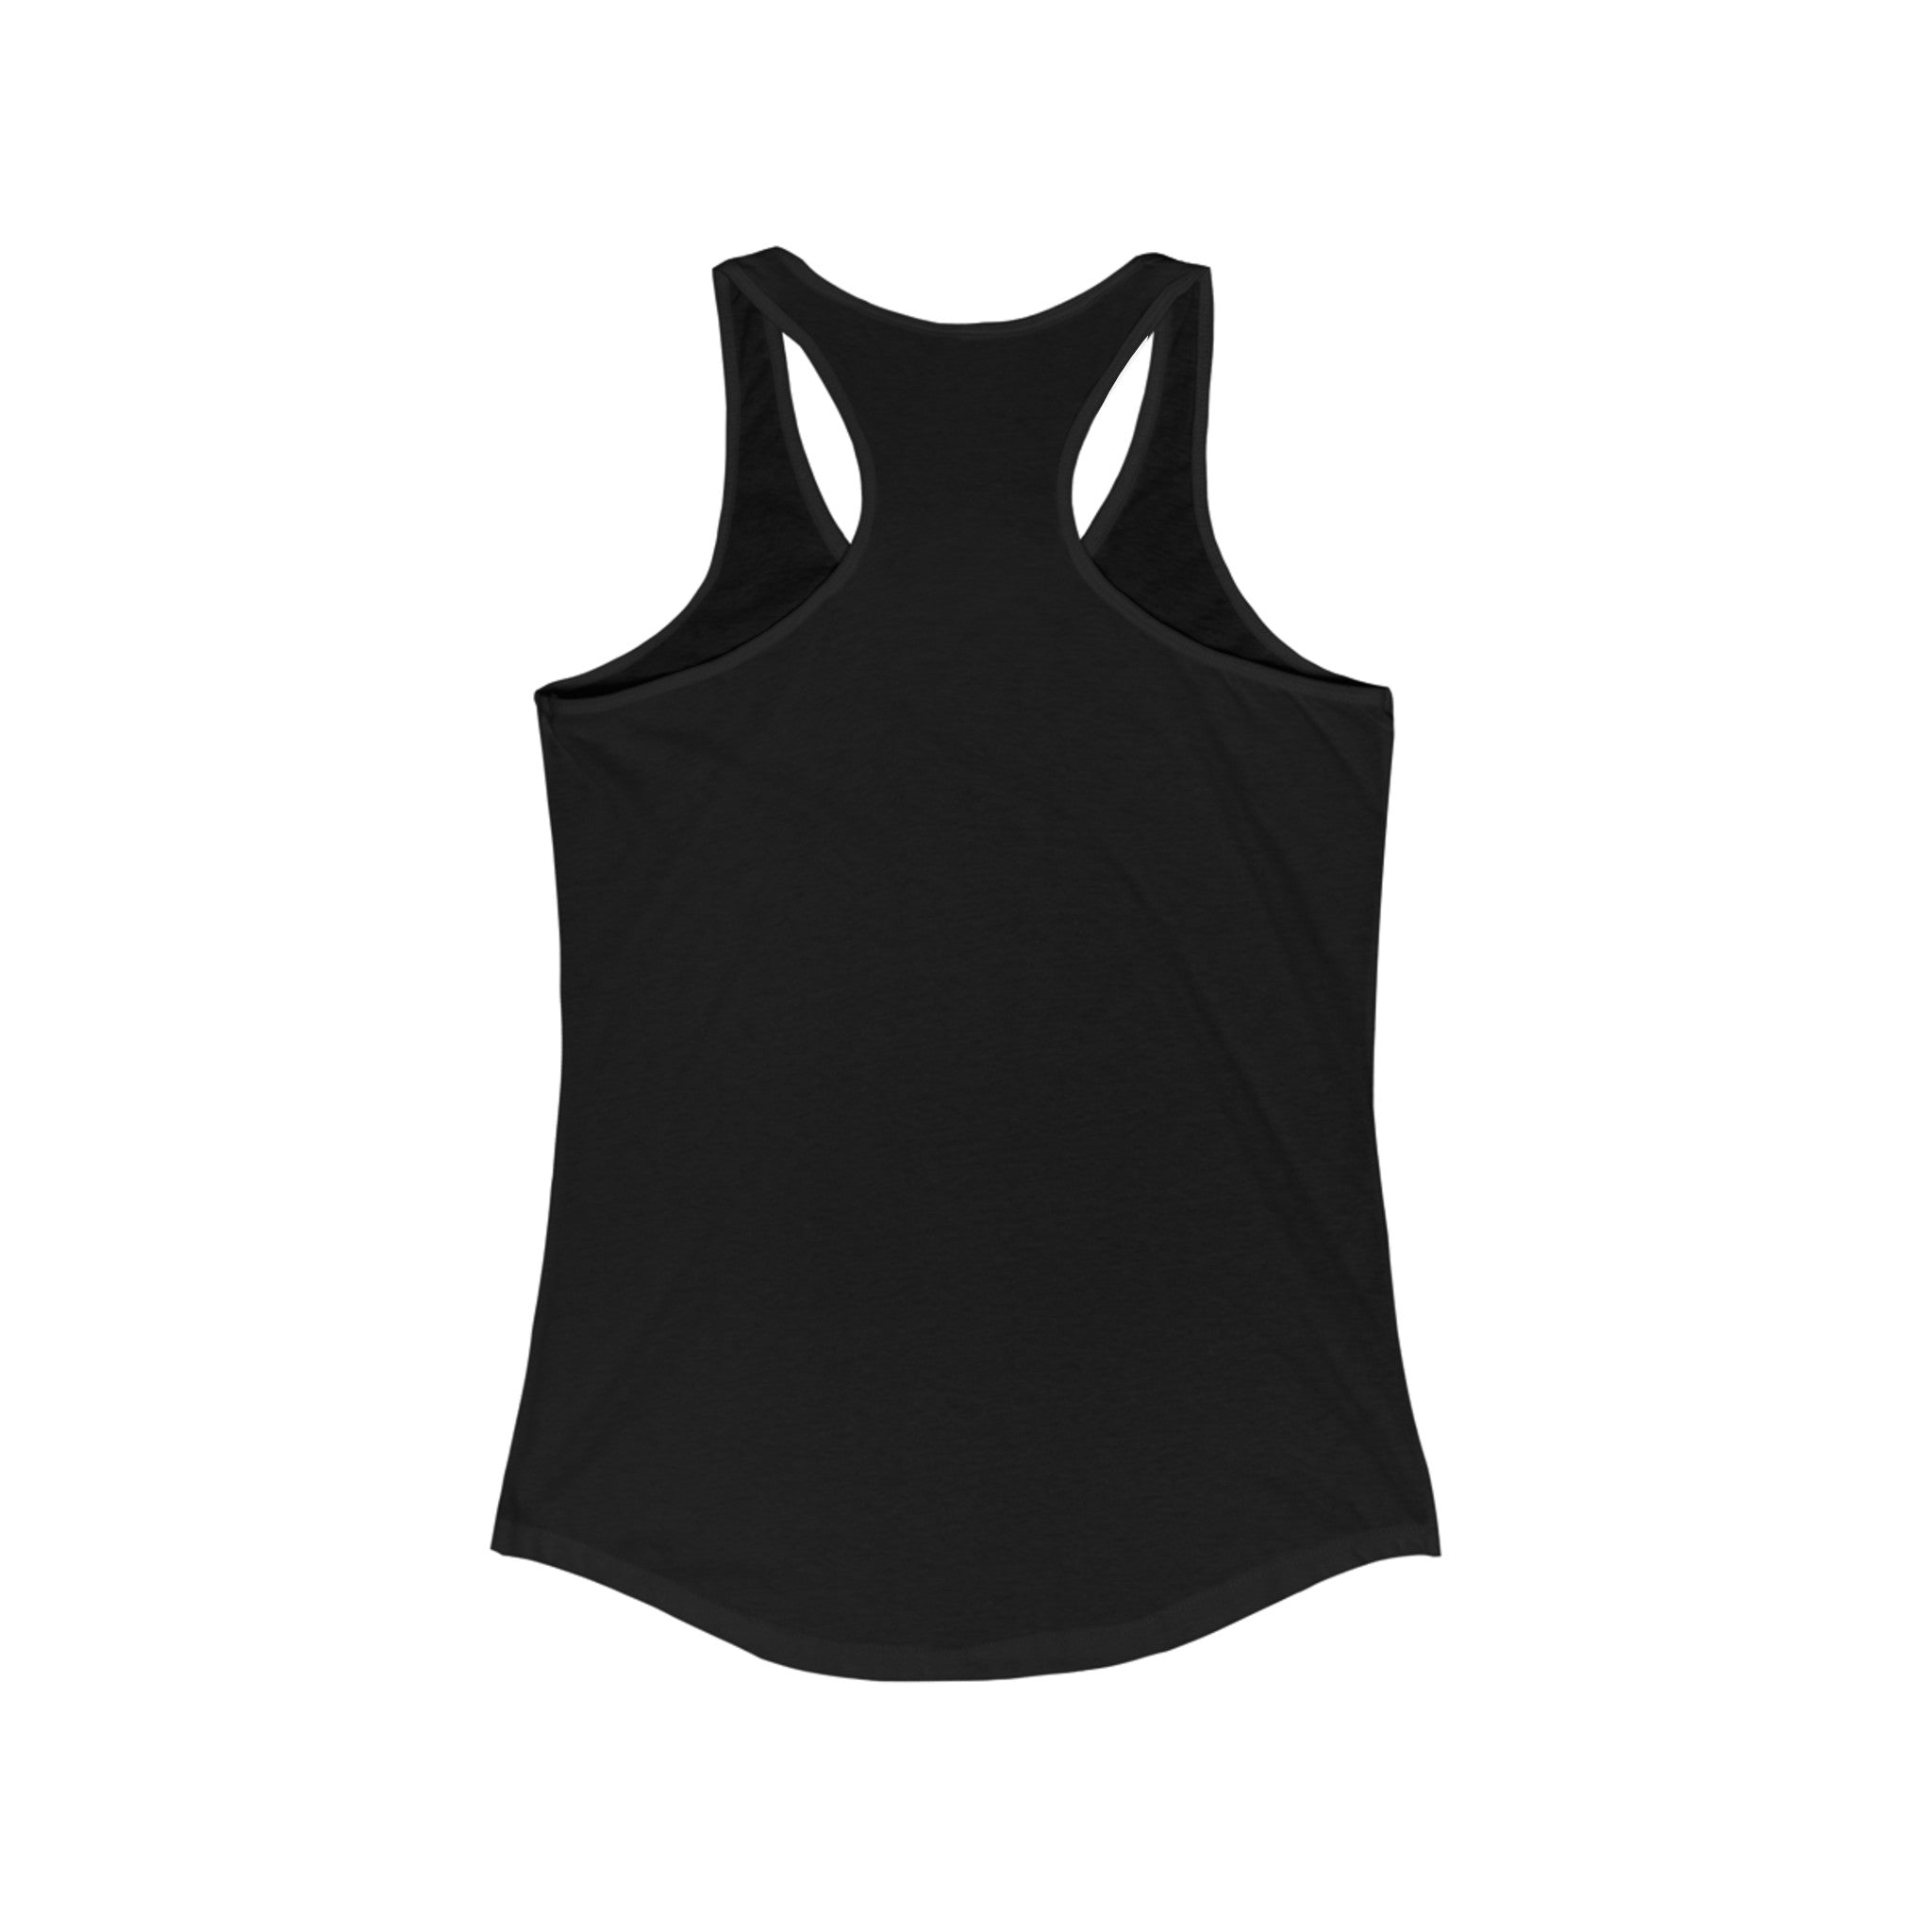 A lightweight PO-RN - Women's Racerback Tank photographed from the back, showcasing its simple design and casual style, perfect for active living.